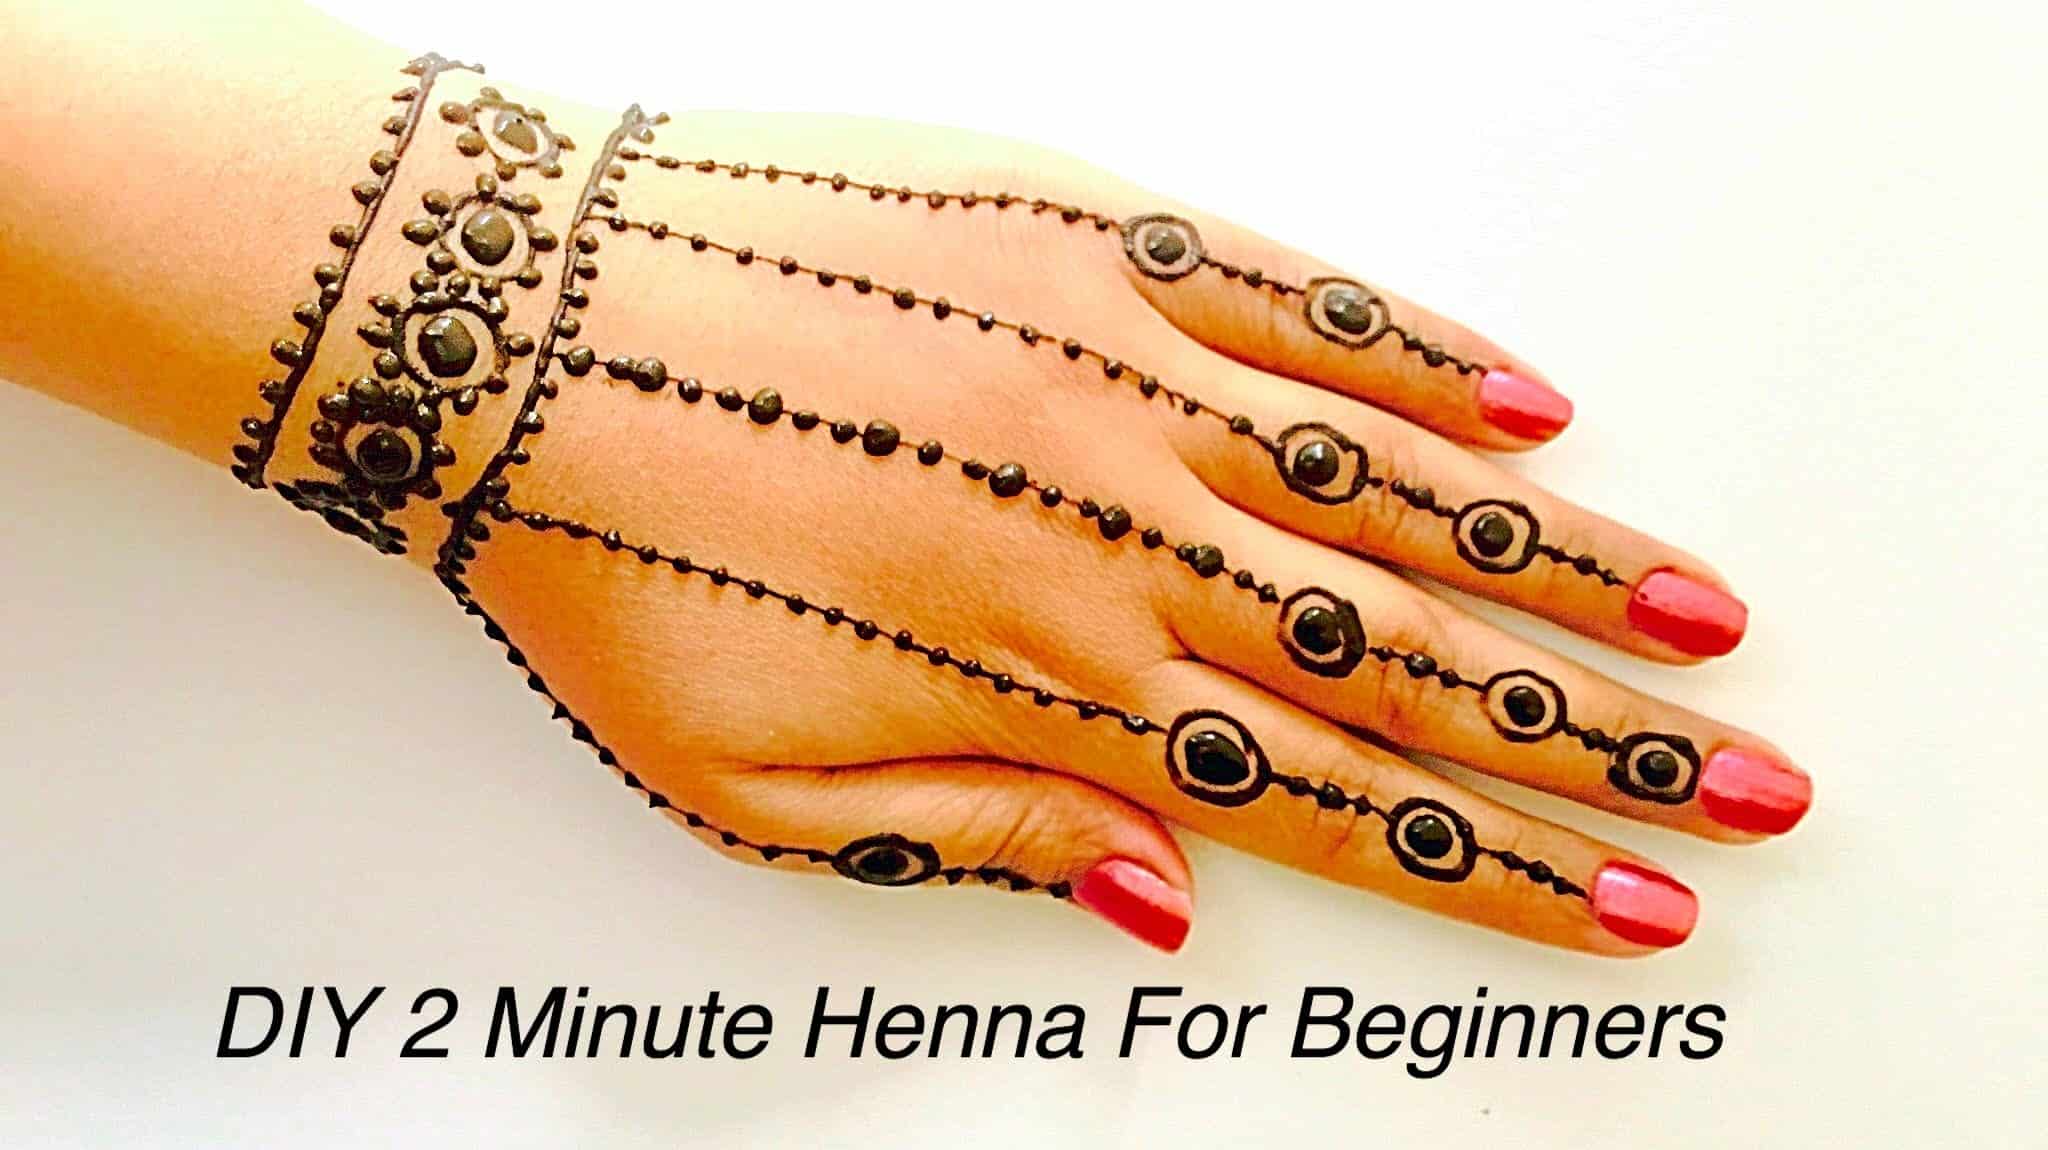 15 Simple Henna Tattoo Designs To Show Off In Warm Weather,Stylish Mehndi Tattoo Designs For Hand